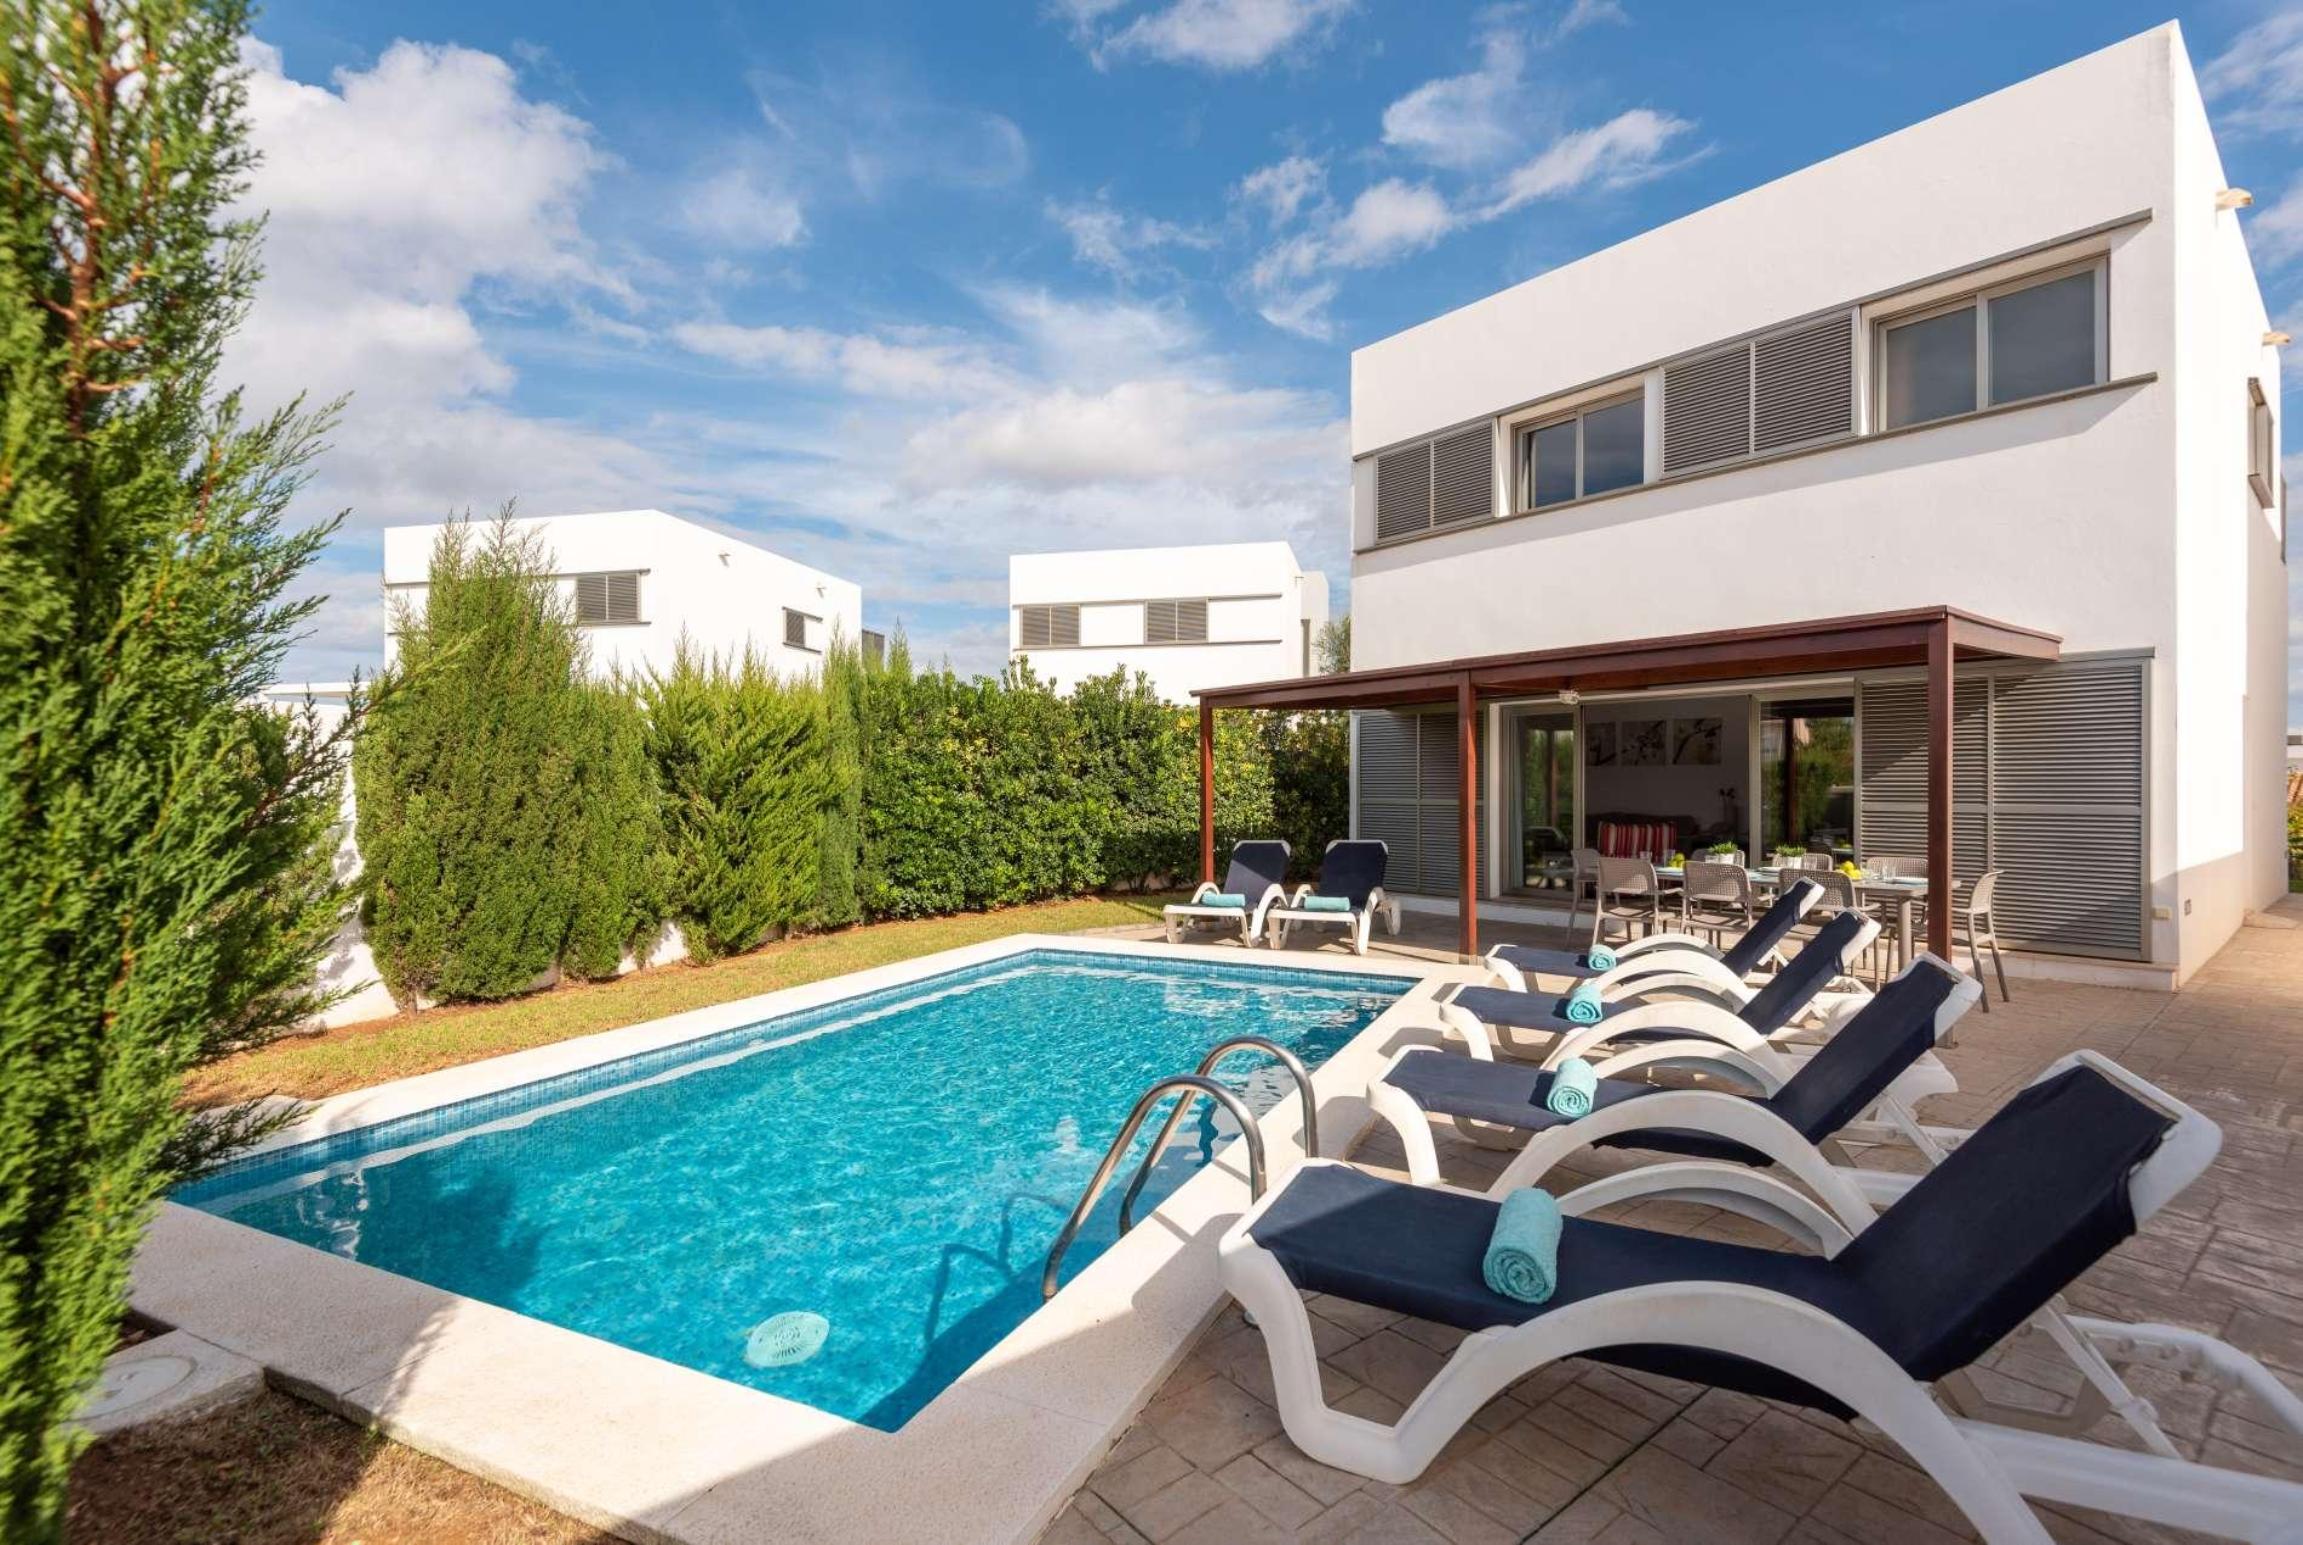 Property Image 1 - Modern villa with pool near the beach.